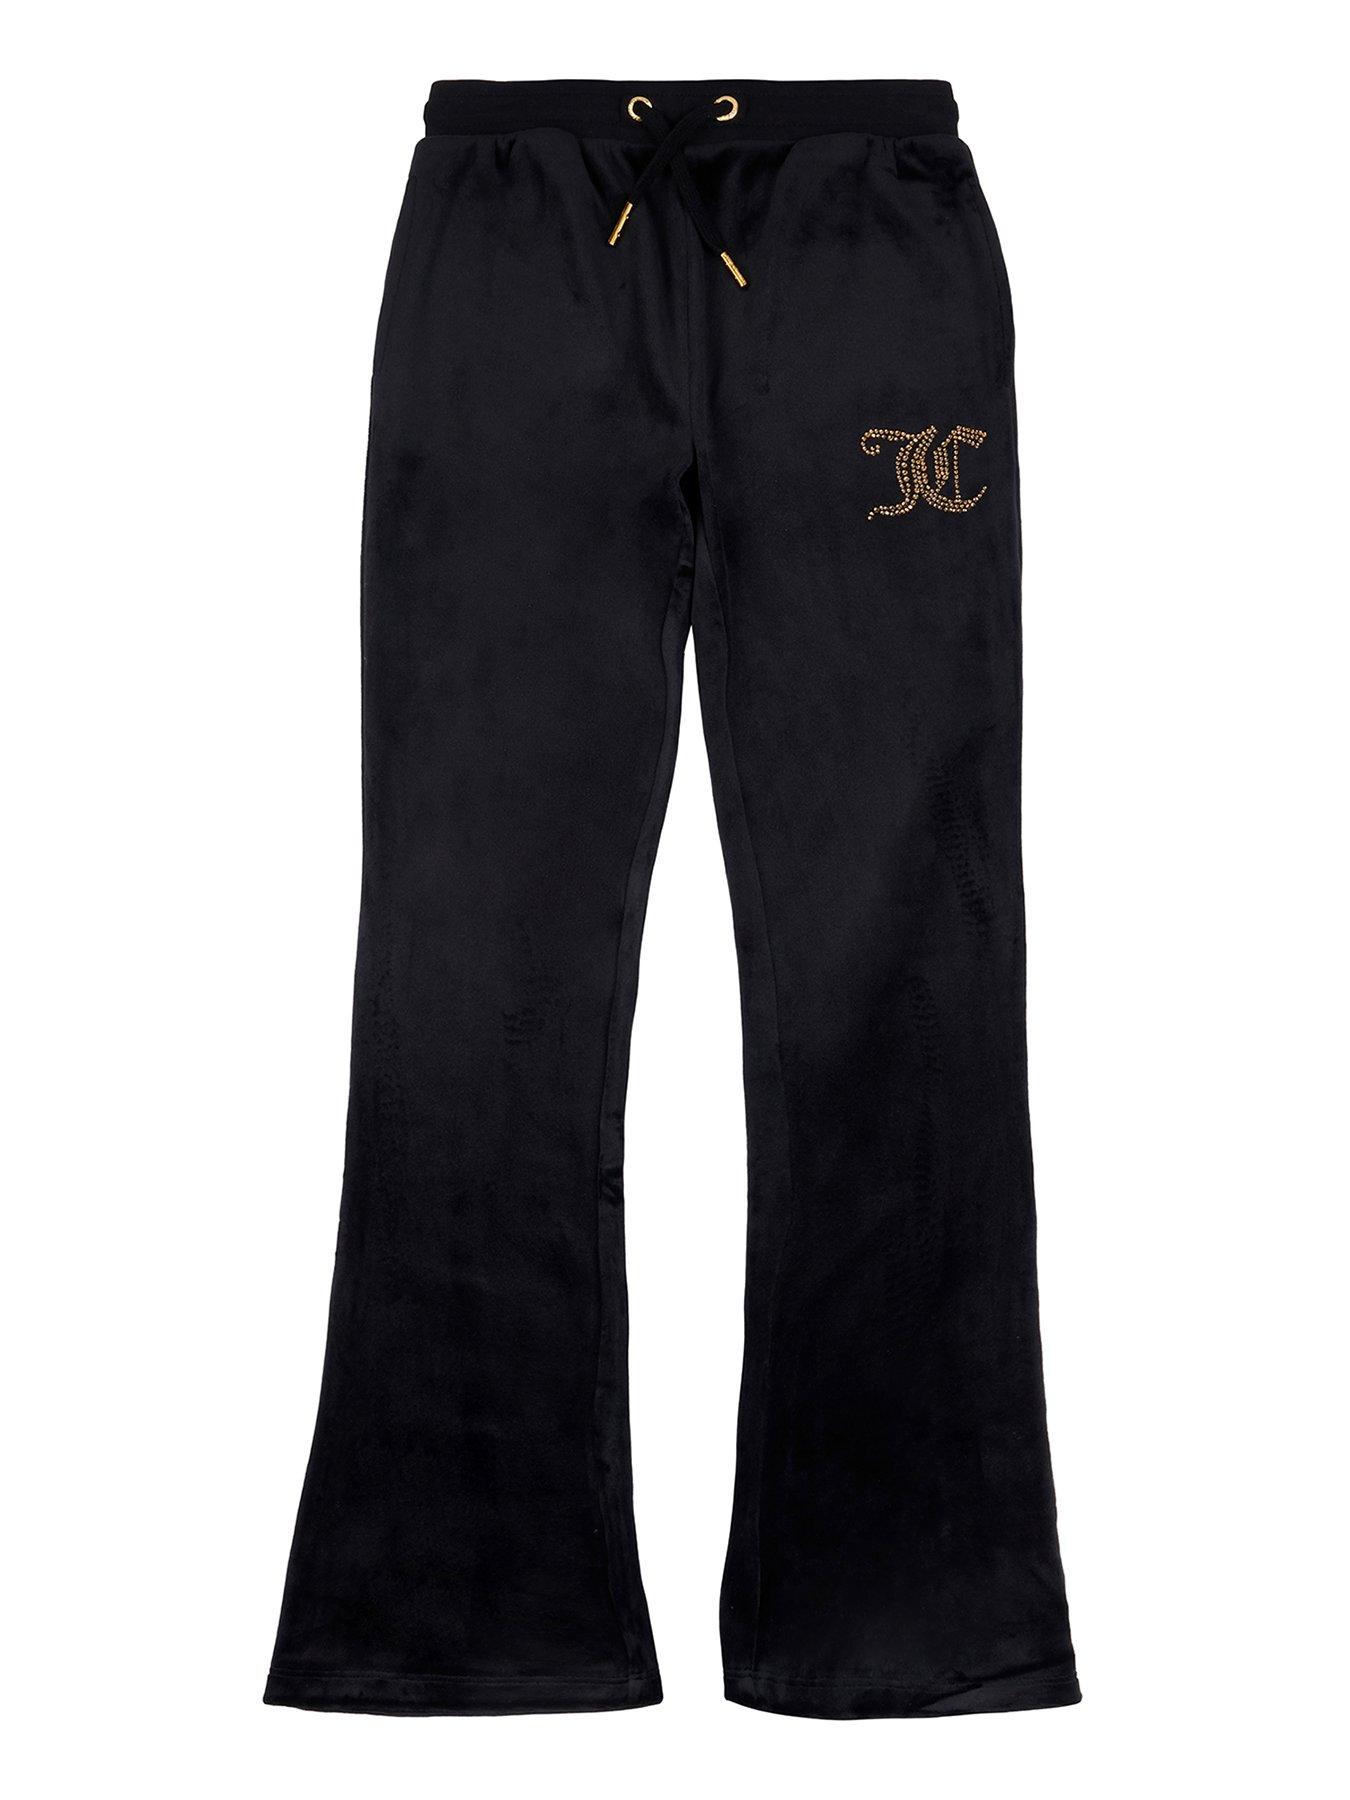 Juicy Couture Girls Tape Wide Leg Joggers - Black